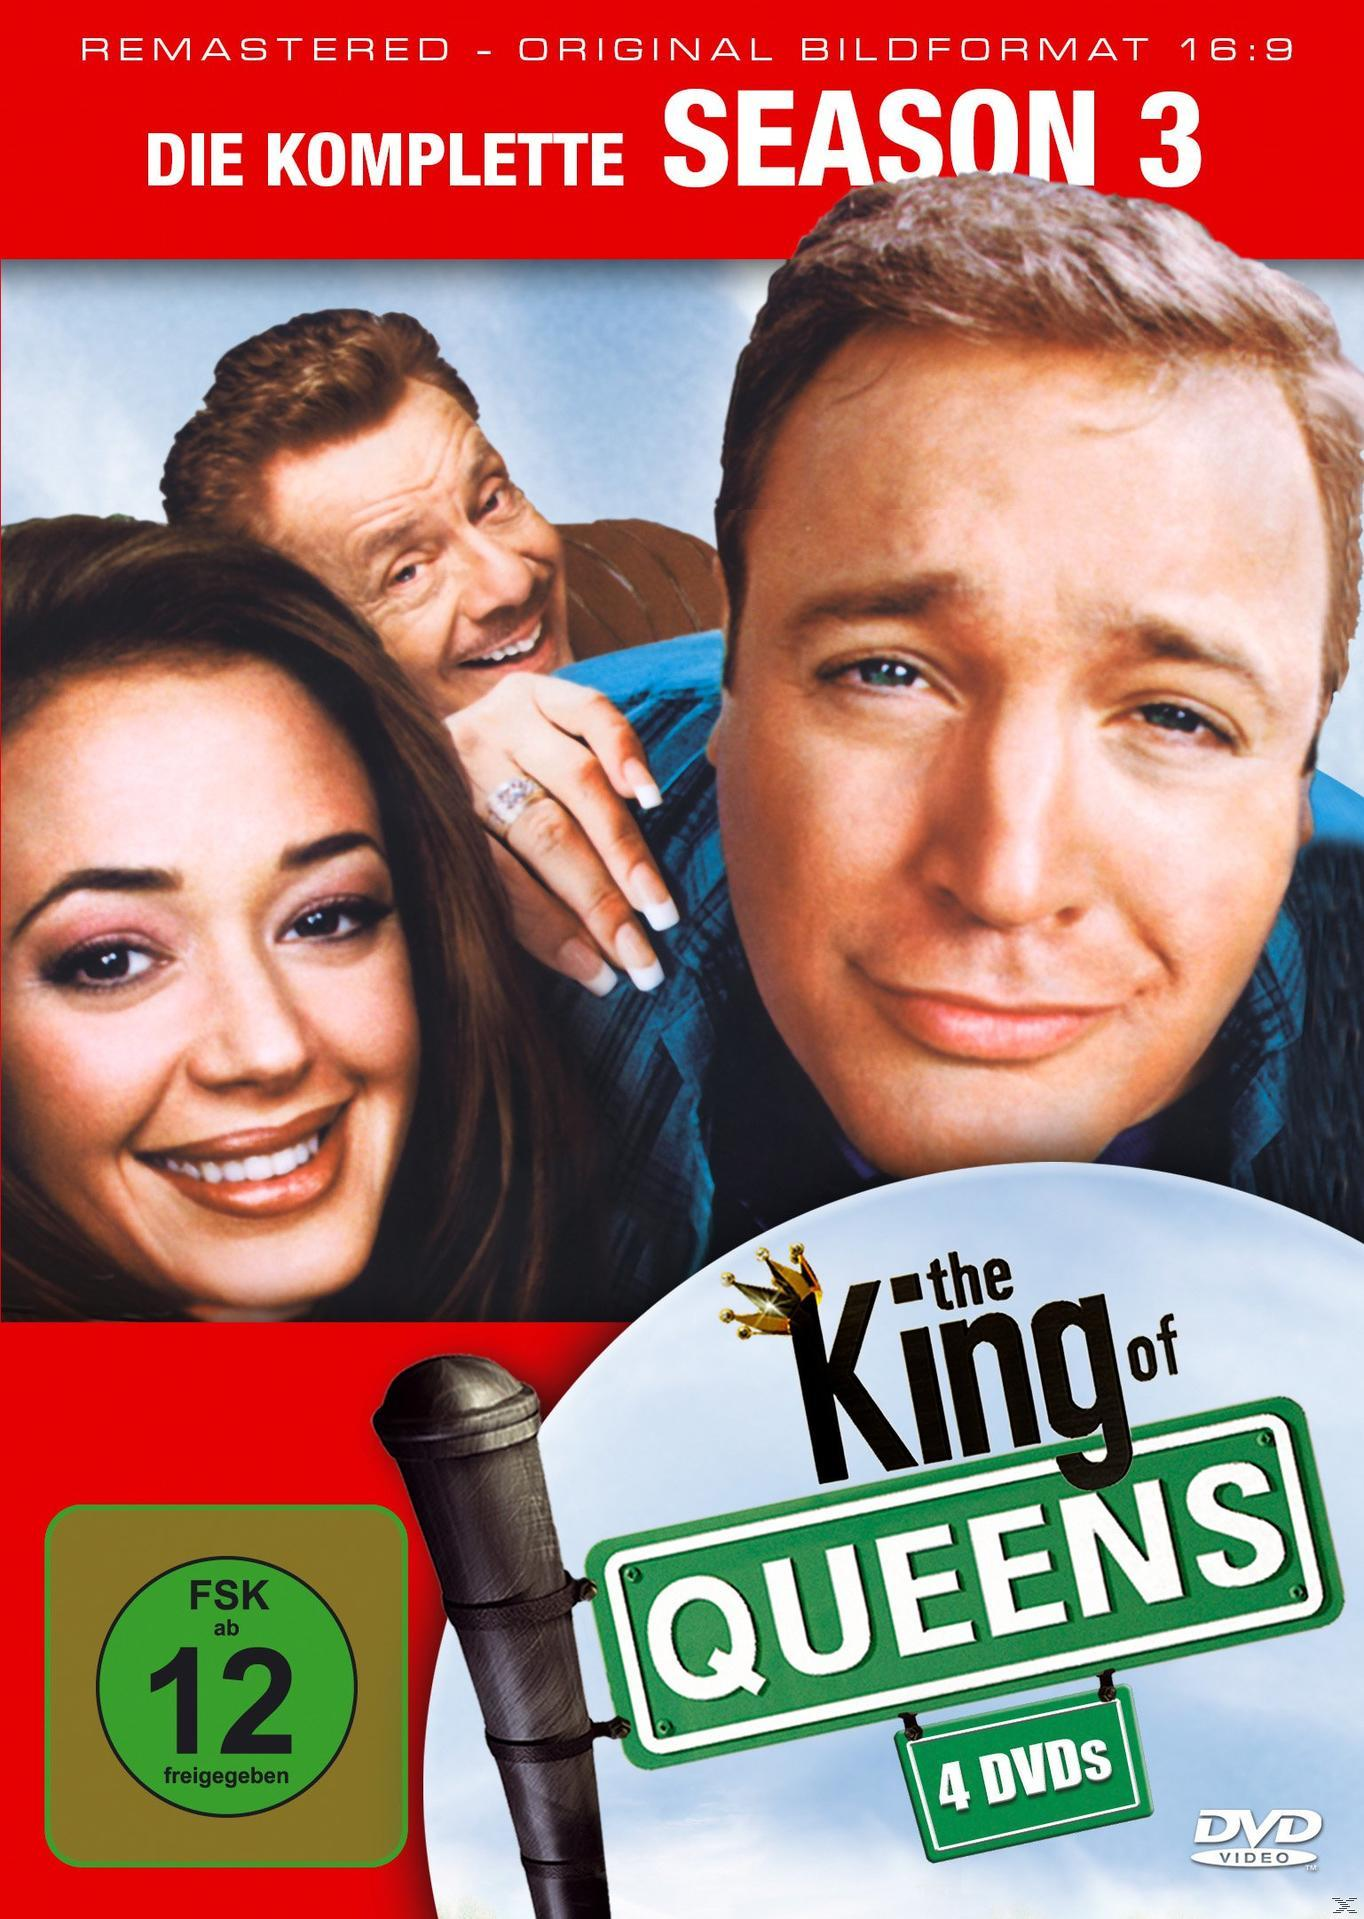 DVD King The of Staffel 3 Queens -